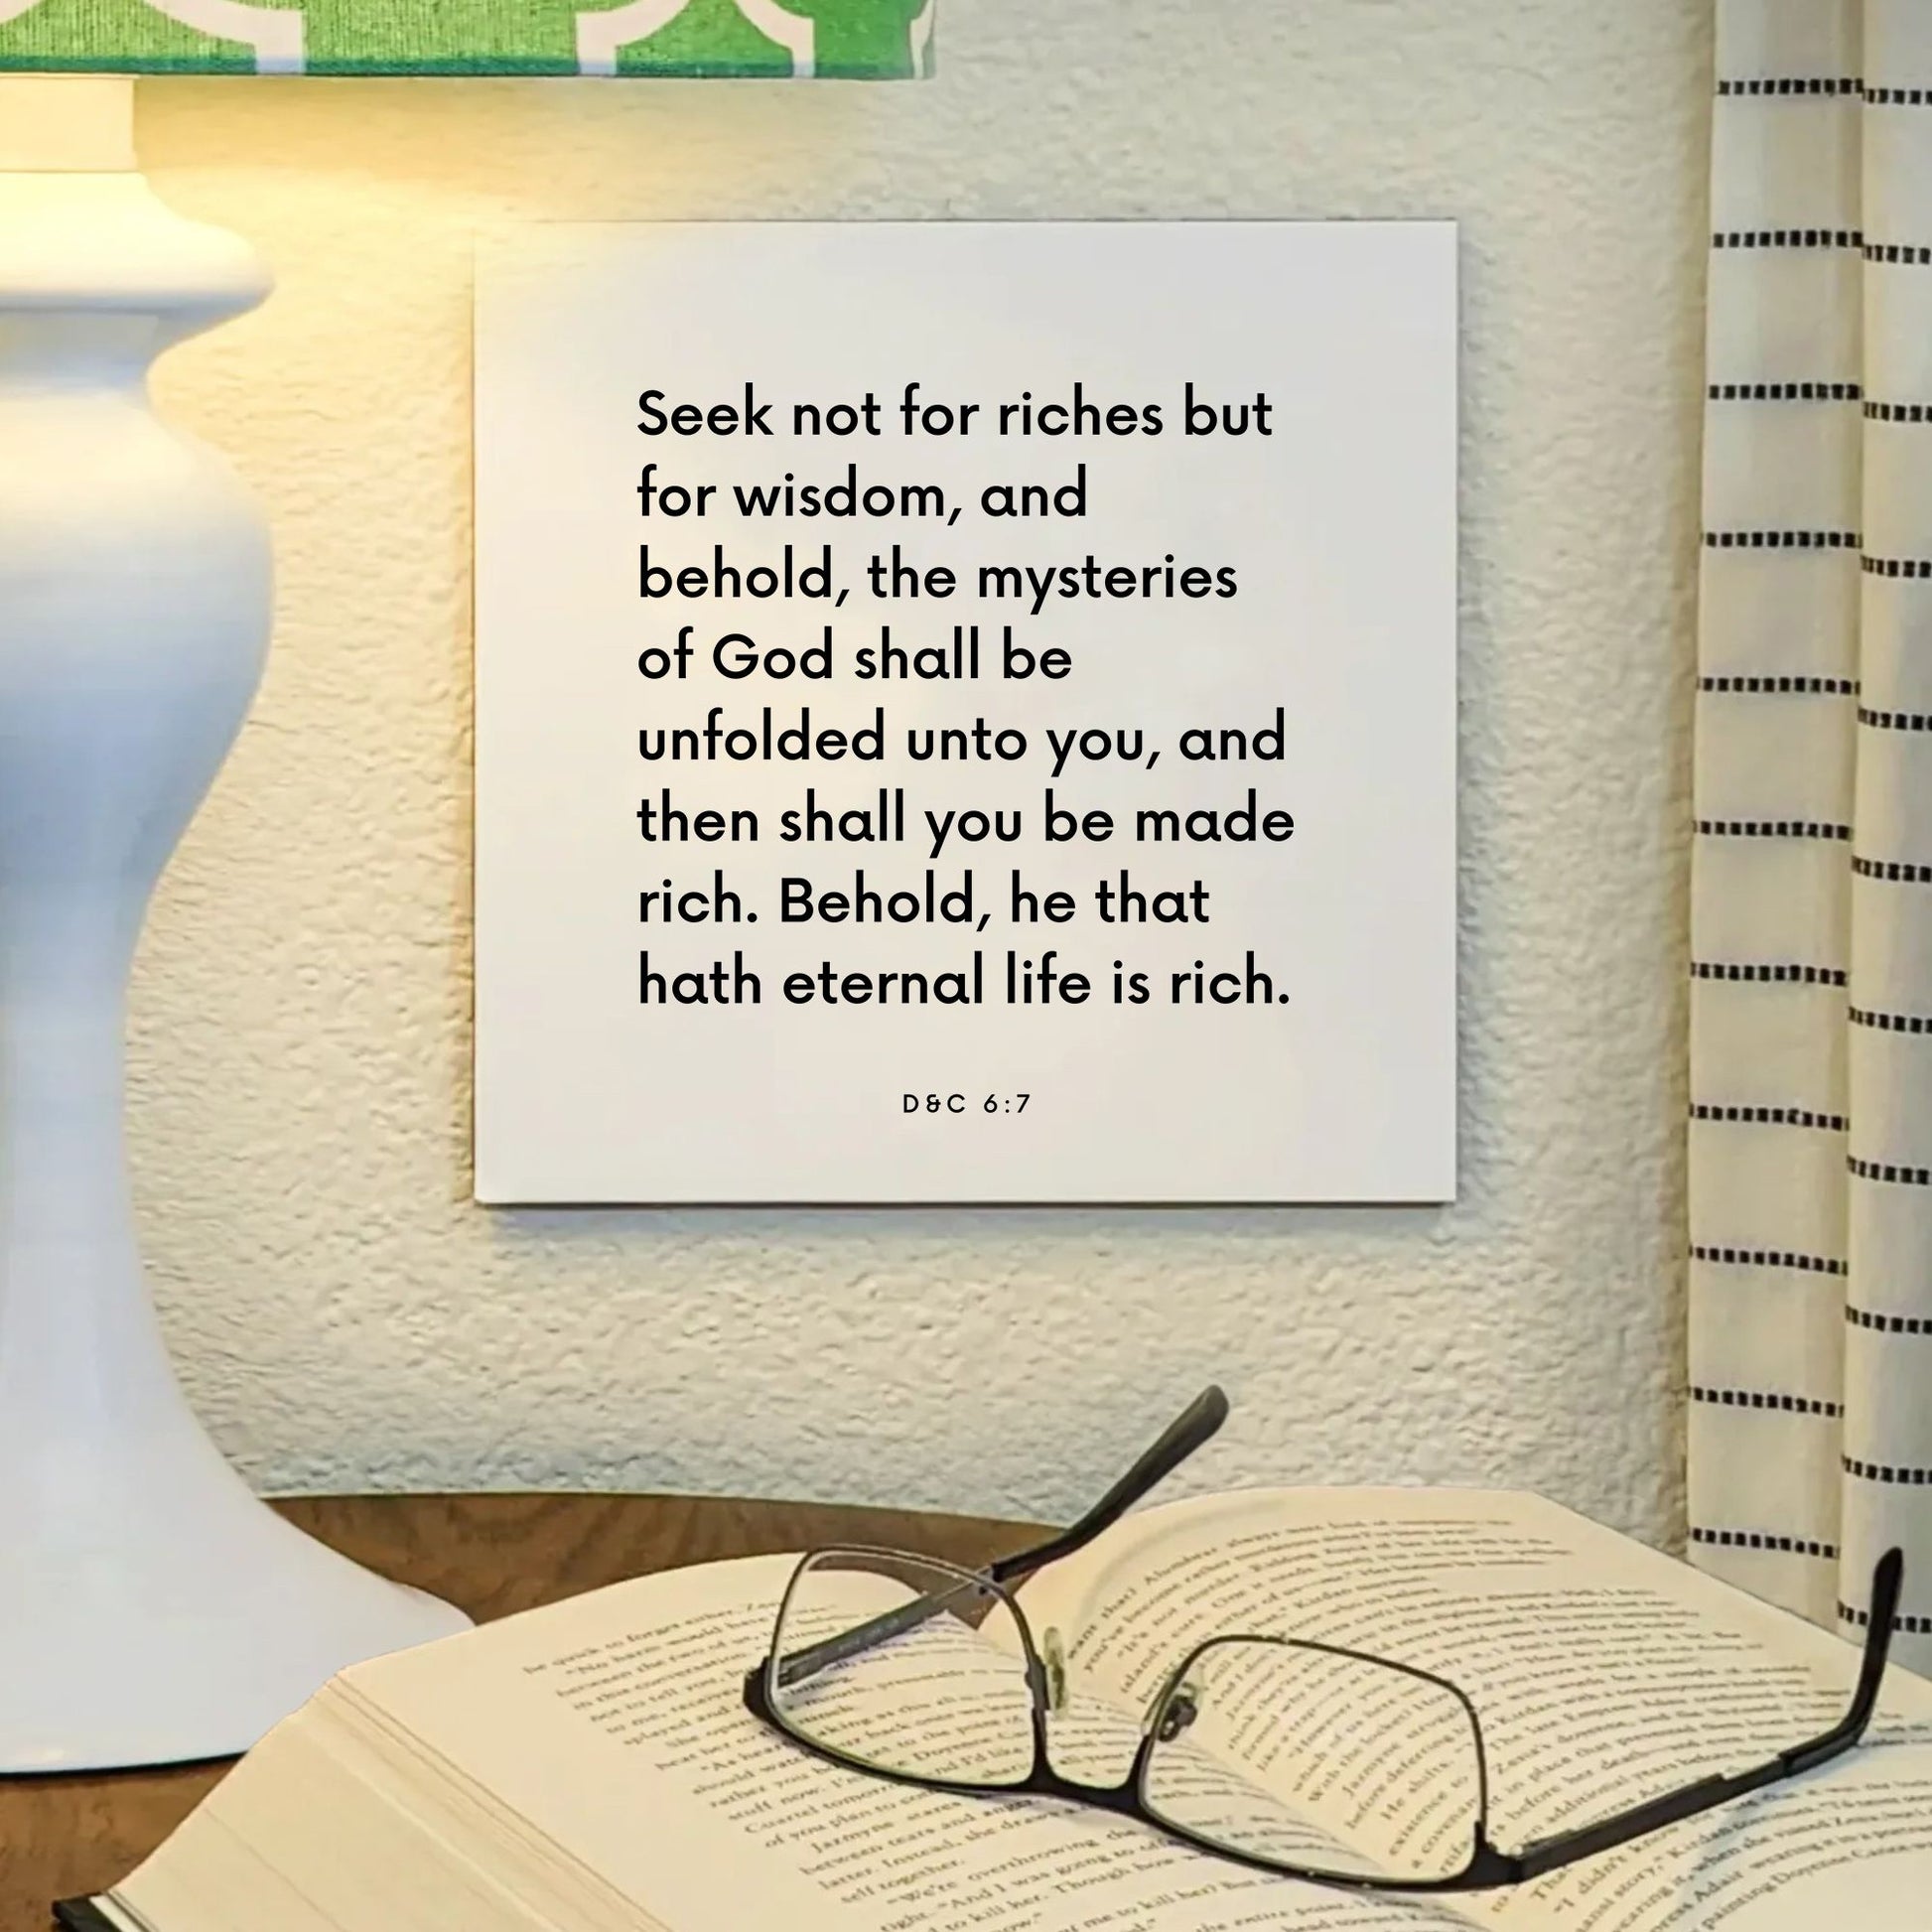 Lamp mouting of the scripture tile for D&C 6:7 - "Seek not for riches but for wisdom"